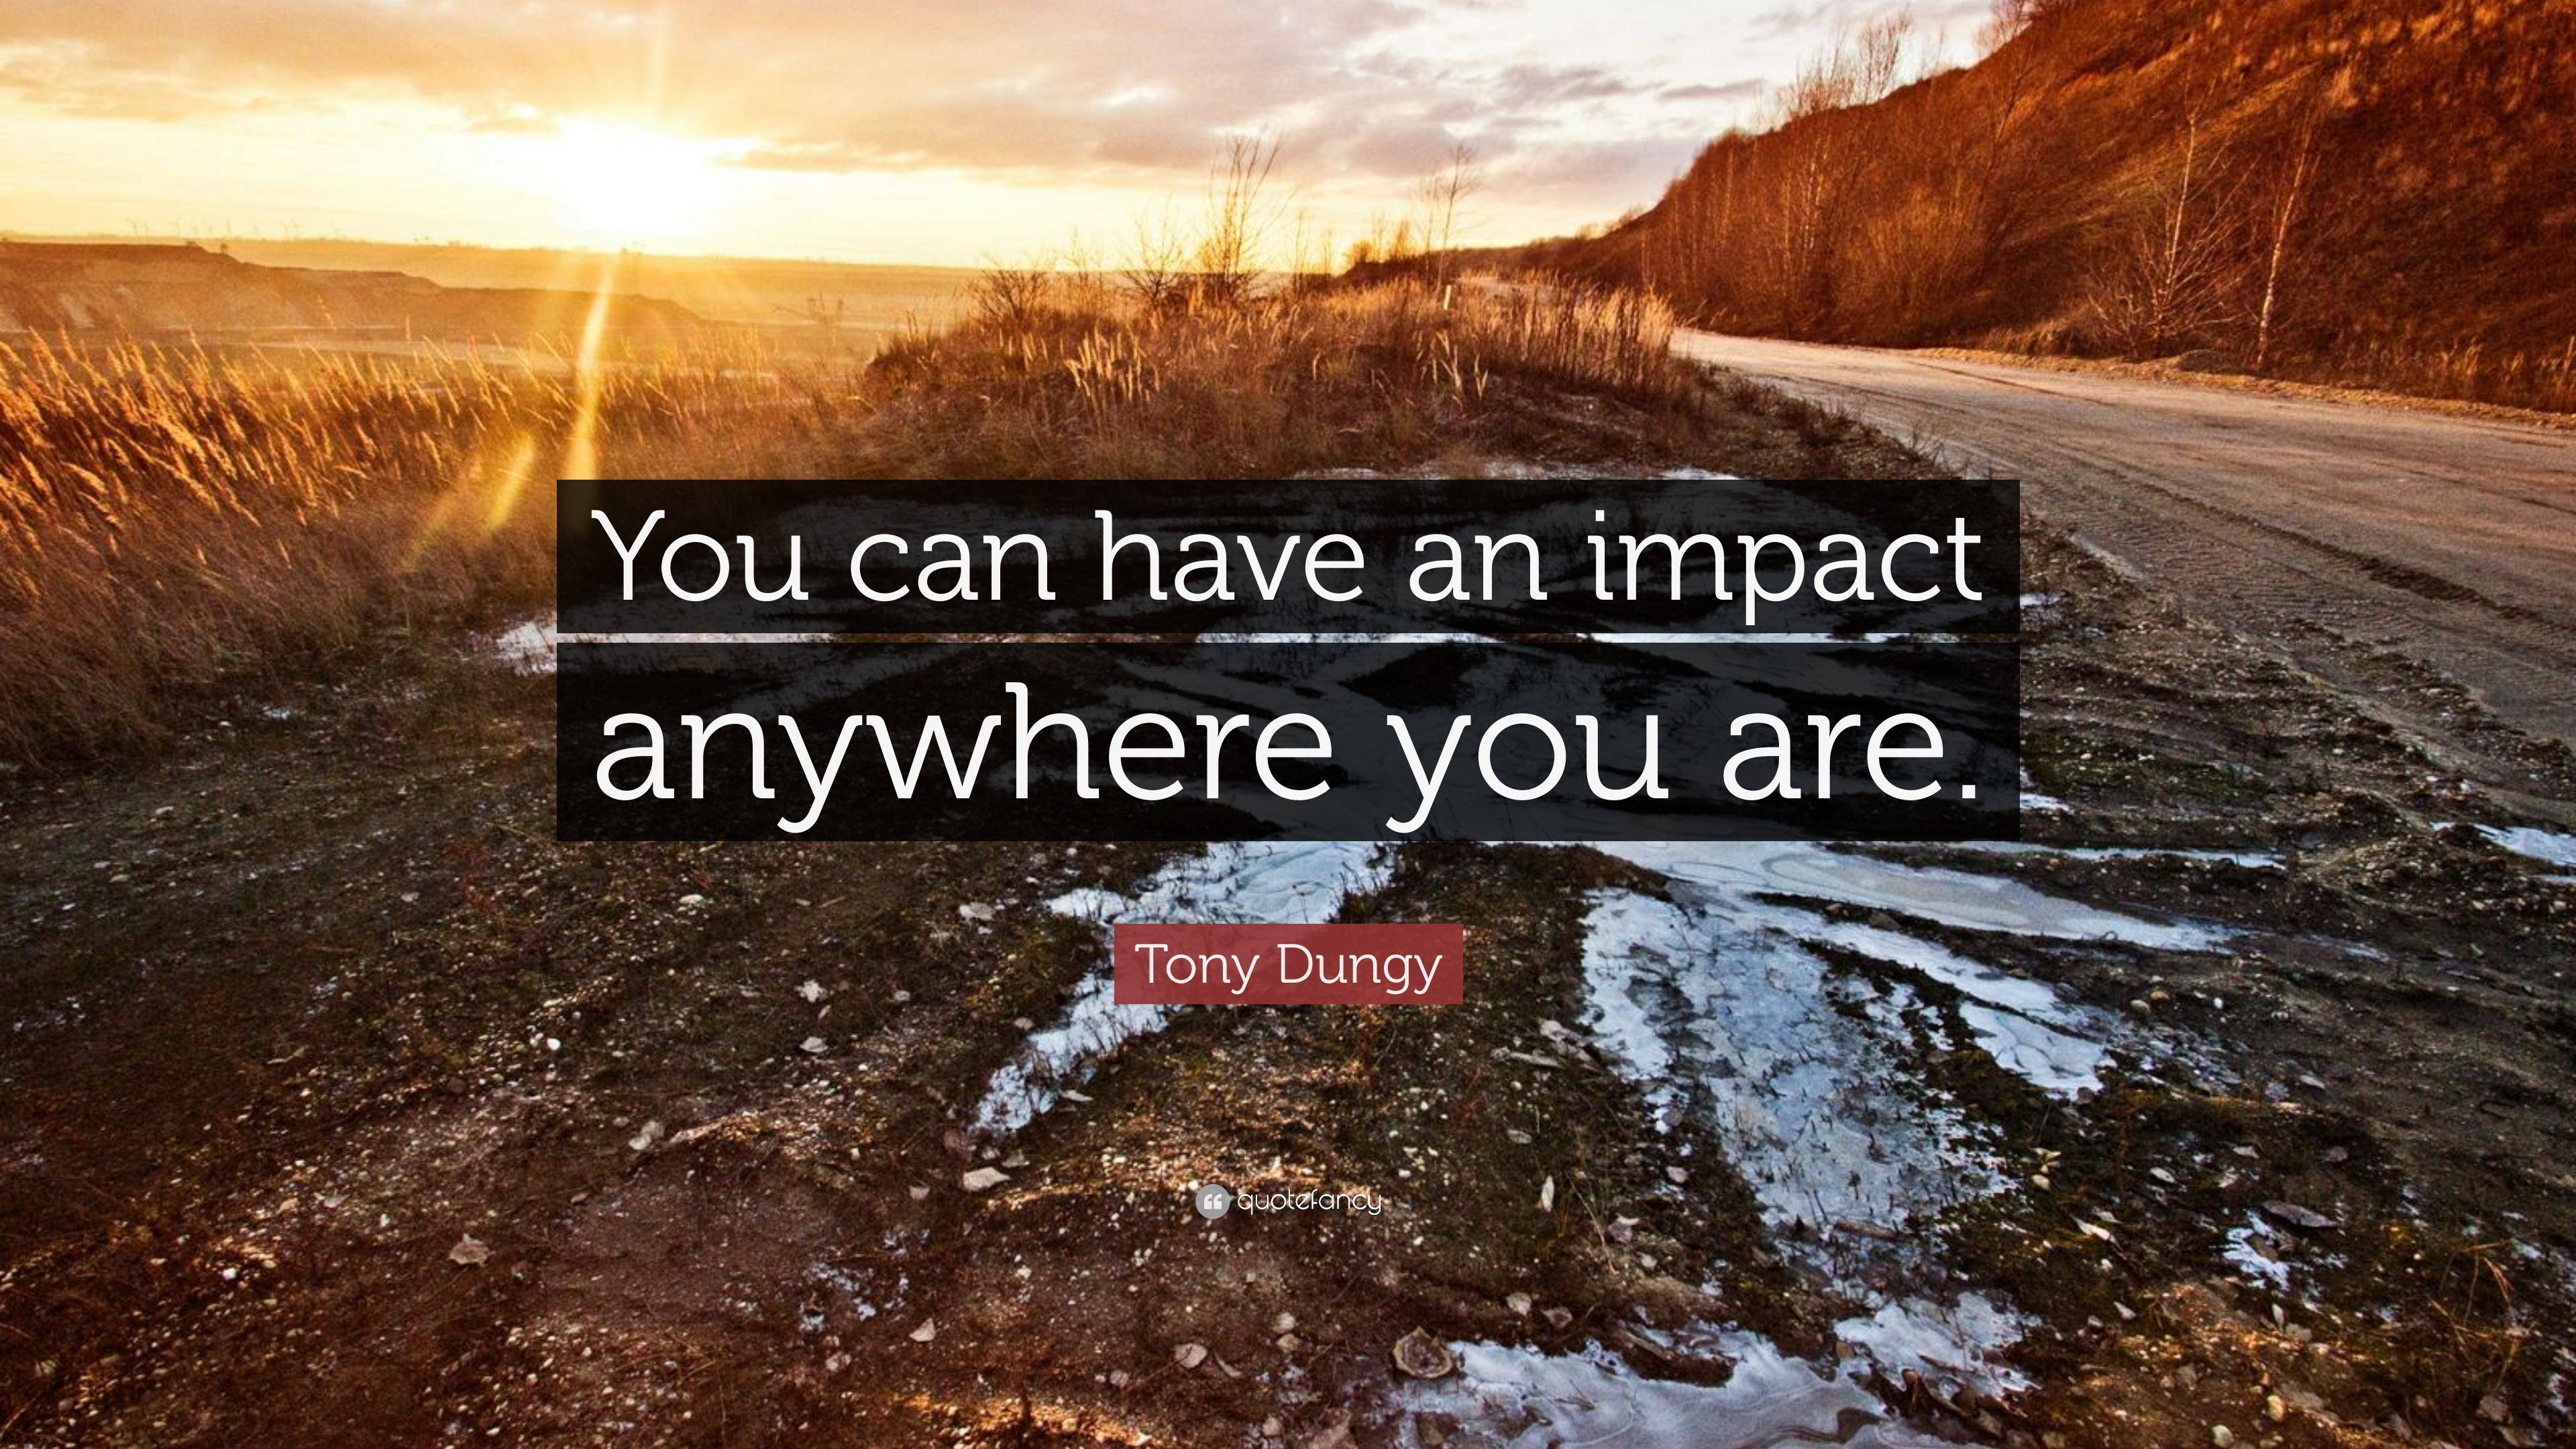 Tony Dungy Quote: “You can have an impact anywhere you are.”